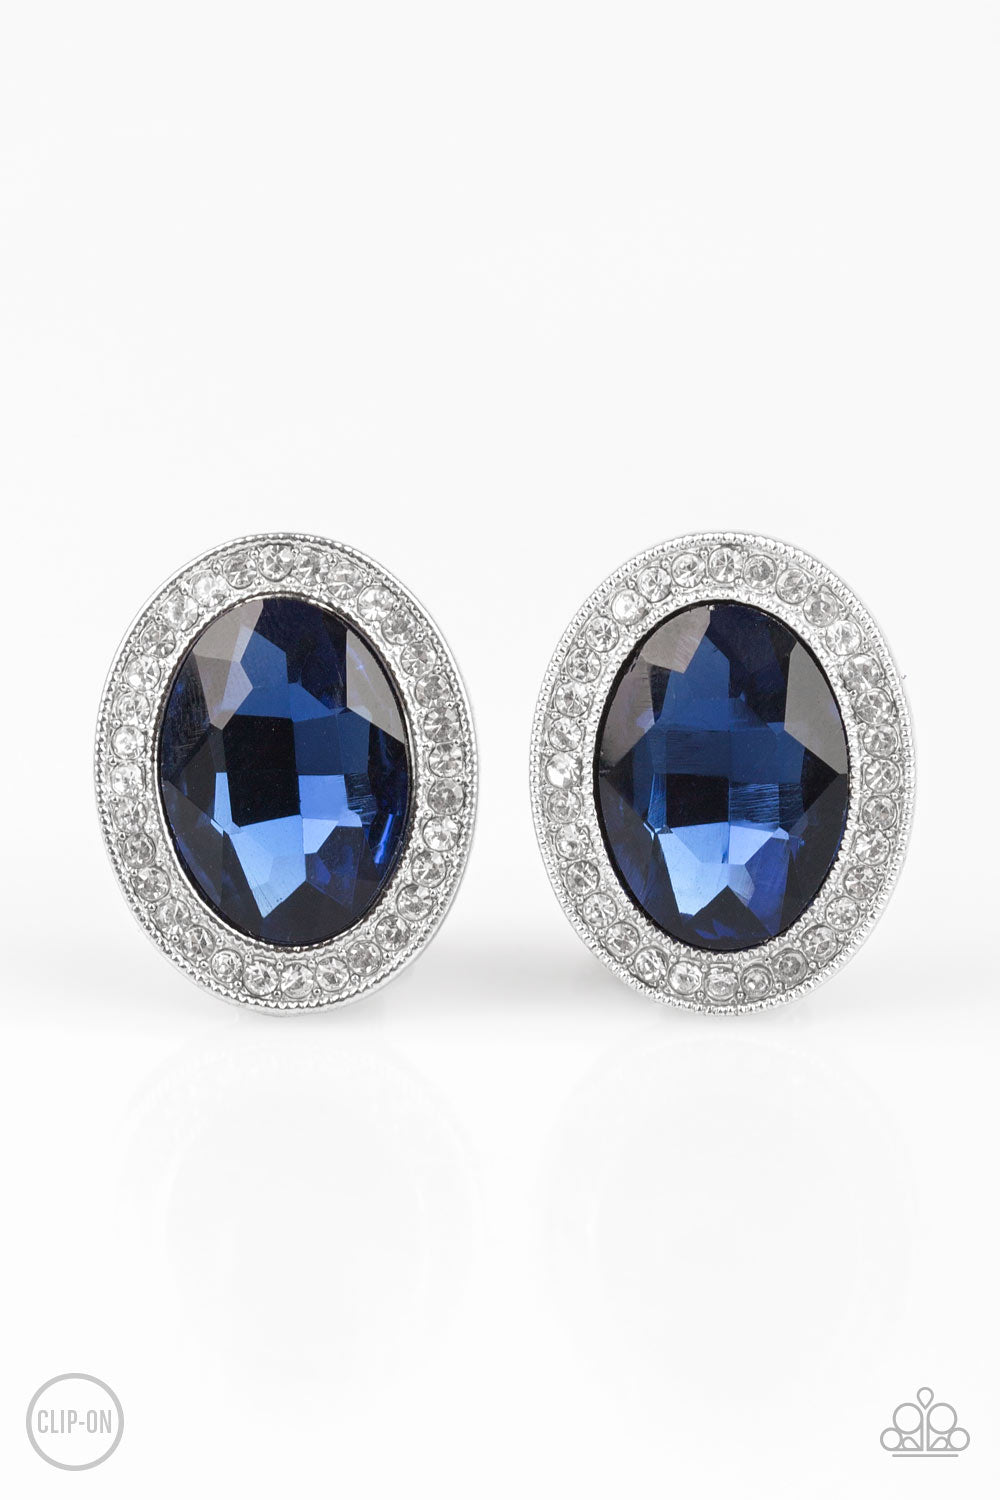 Paparazzi Accessories - Only FAME In Town - Blue Clip On Earrings